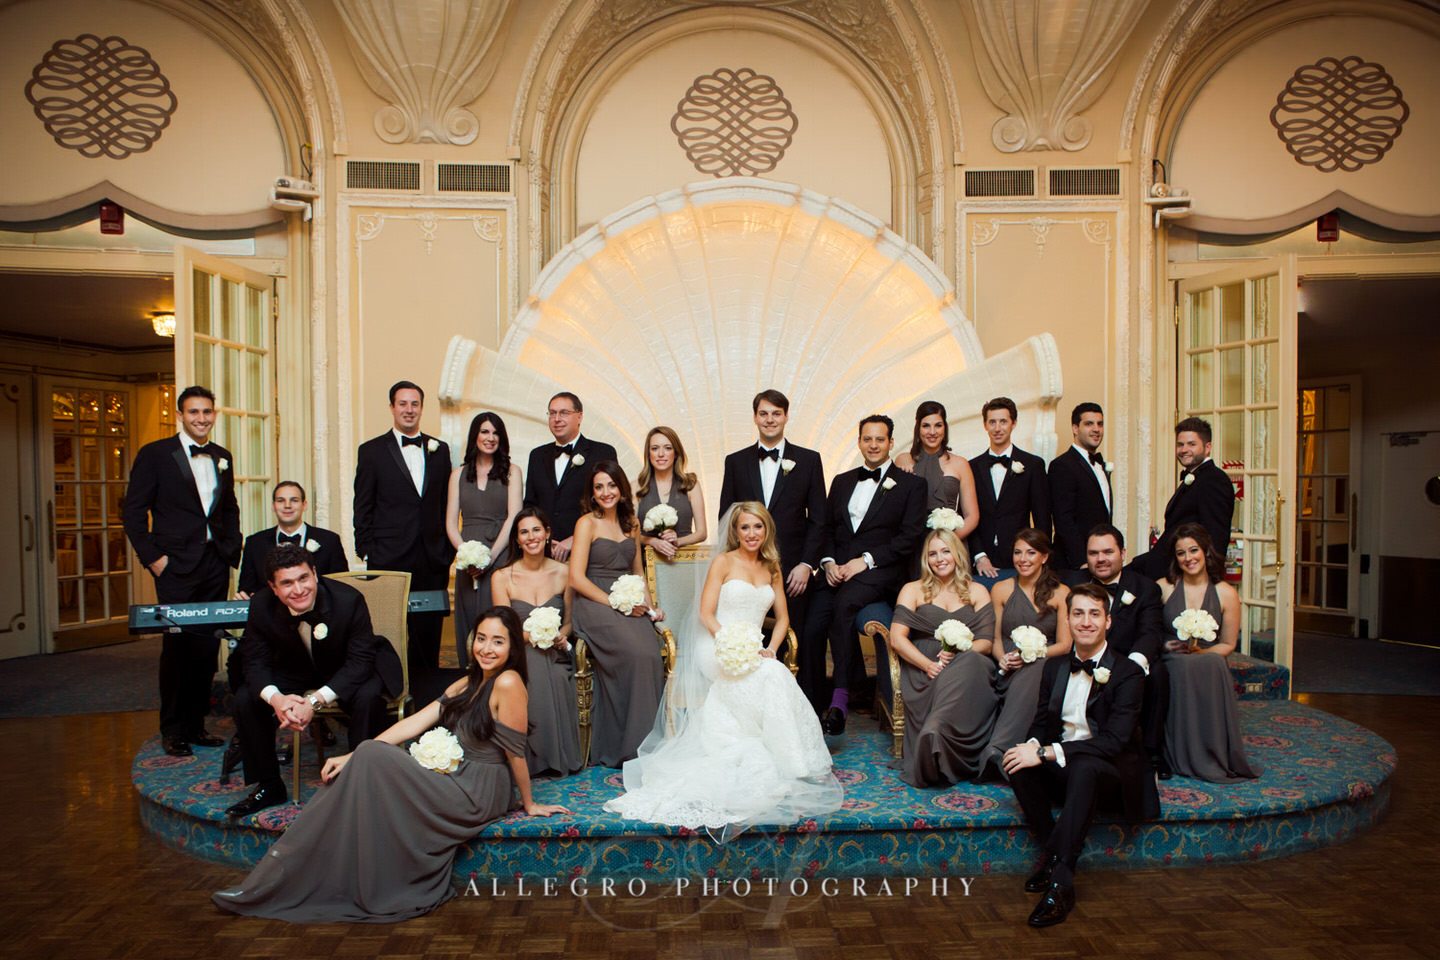 vogue style vanity fair inspired wedding party portraits - fairmont copley plaza wedding photo by Allegro Photography